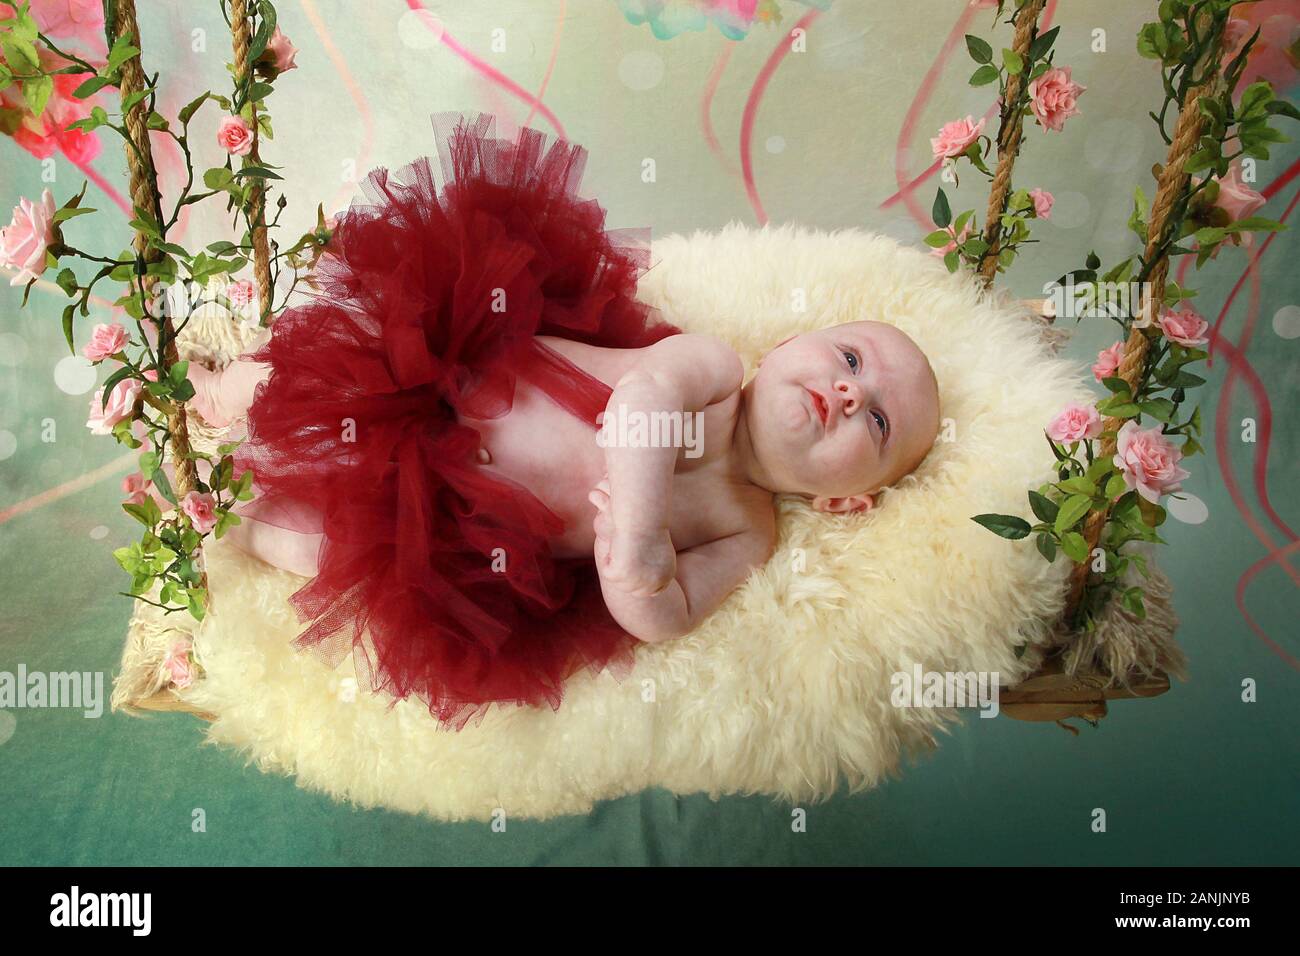 3-month-old-baby-girl-stock-photo-alamy